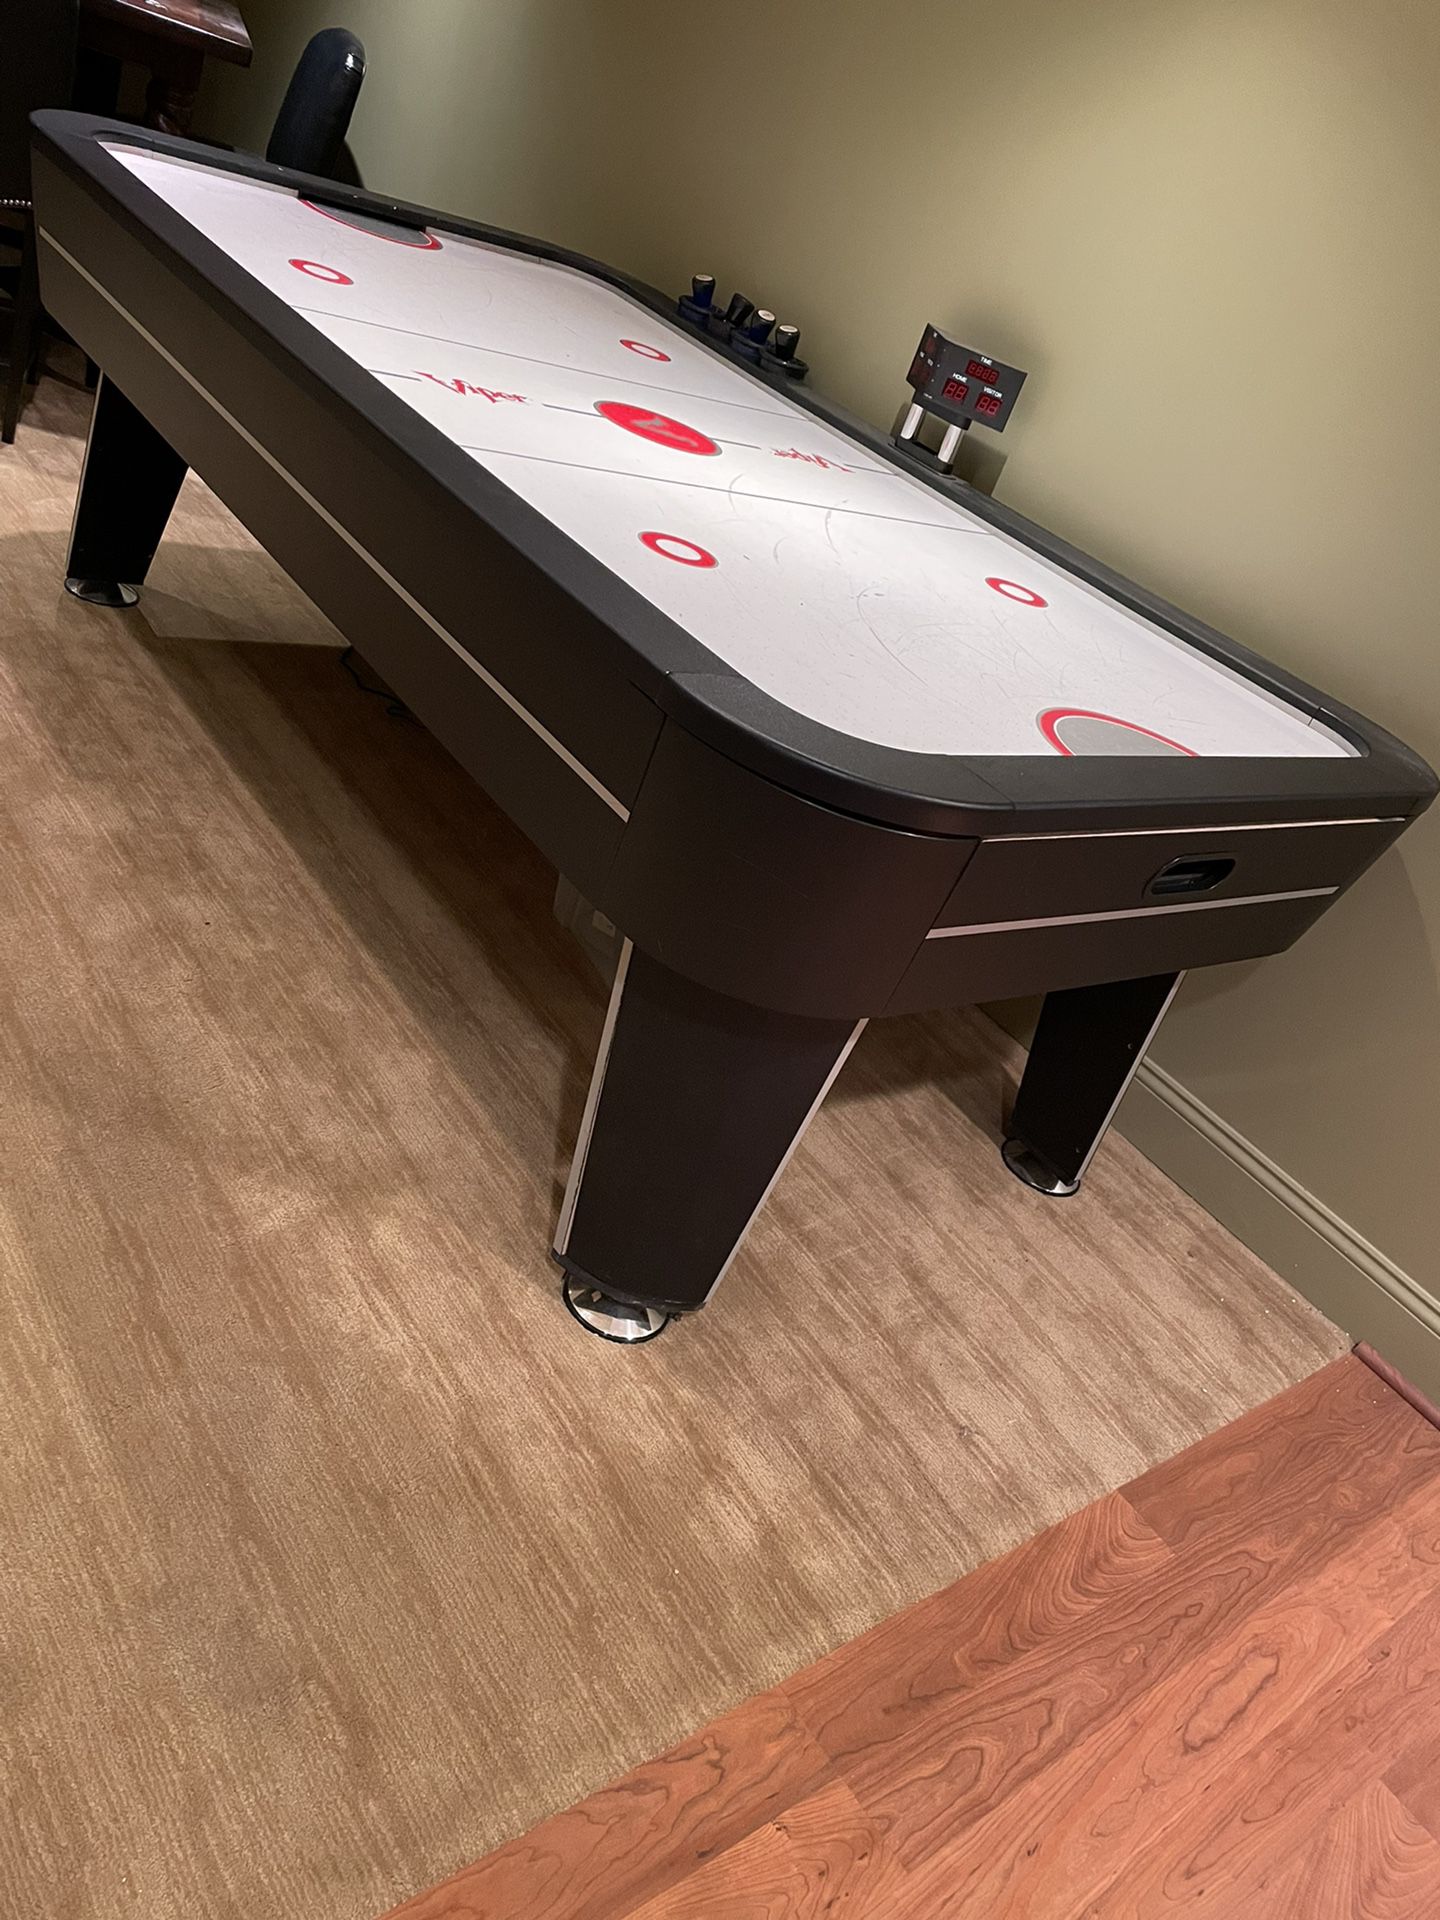 AIR HOCKEY TABLE FULL SIZE 7’6” by 2’8”